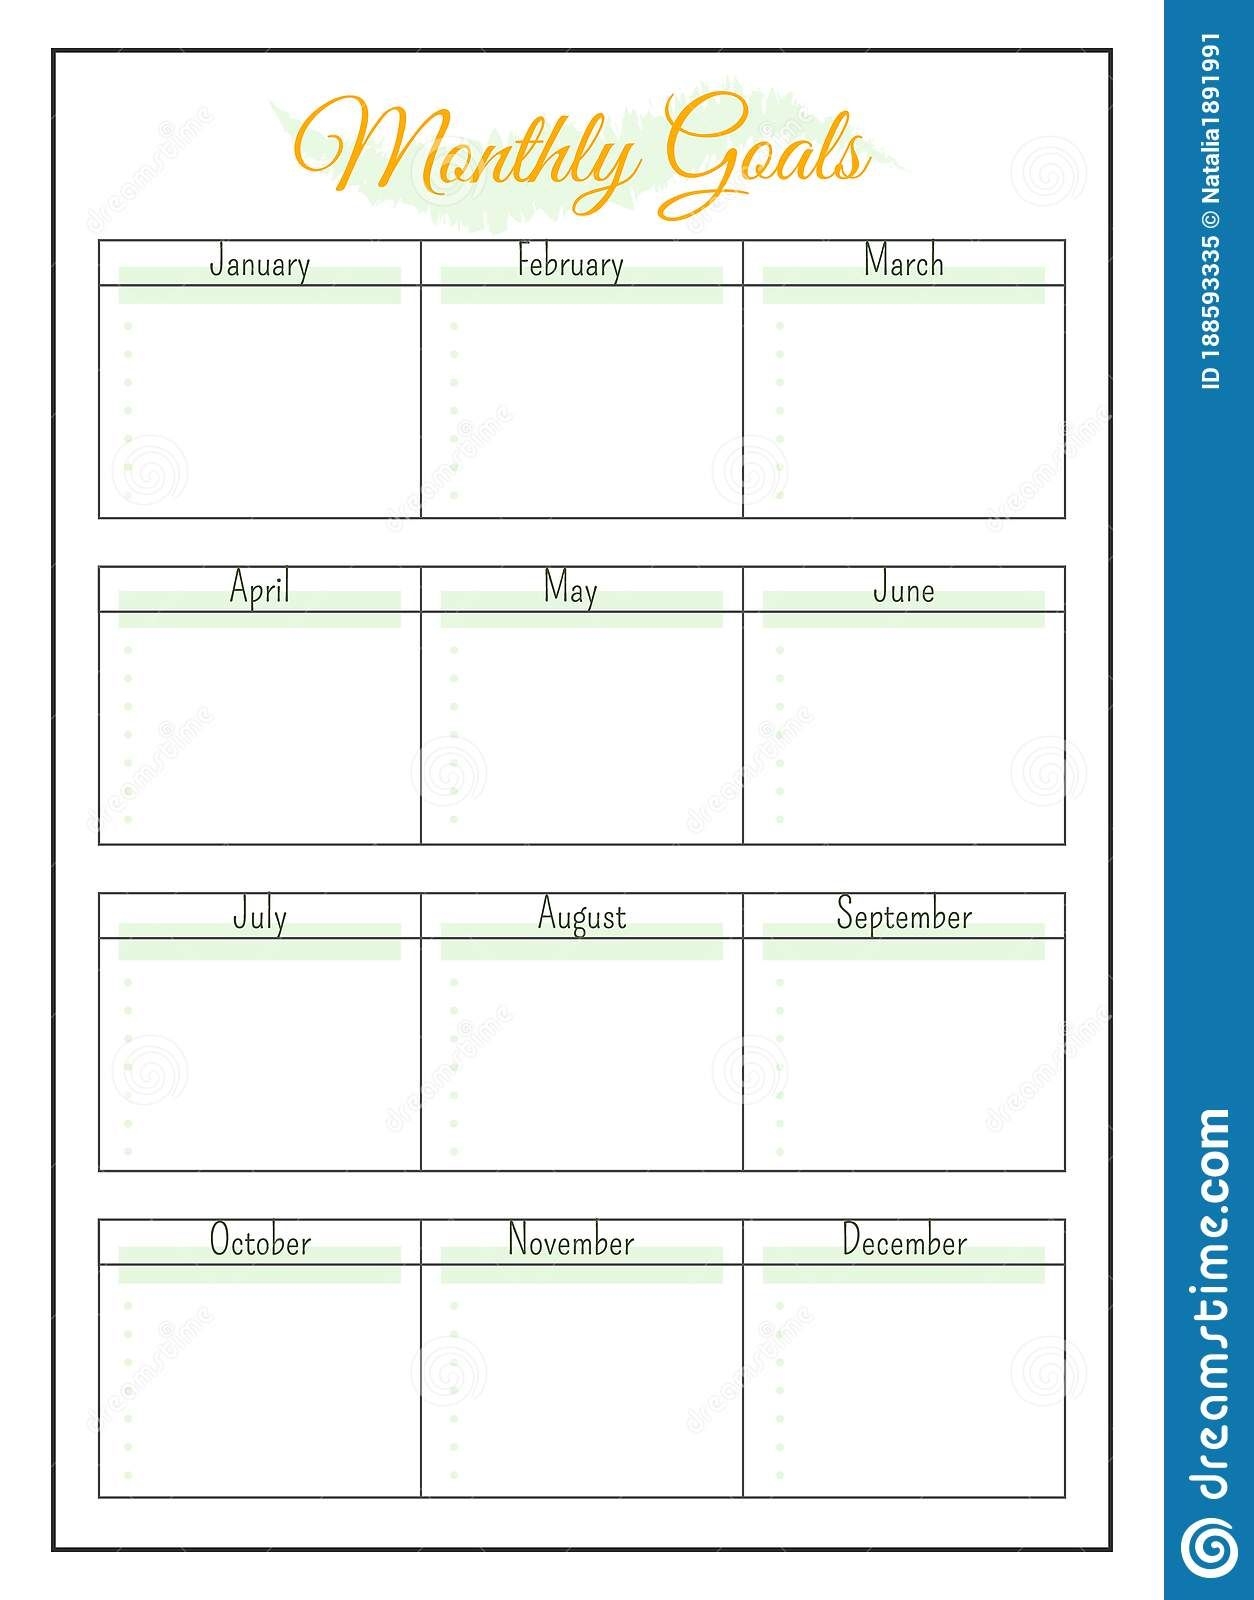 annual monthly goals minimalist planner page design stock